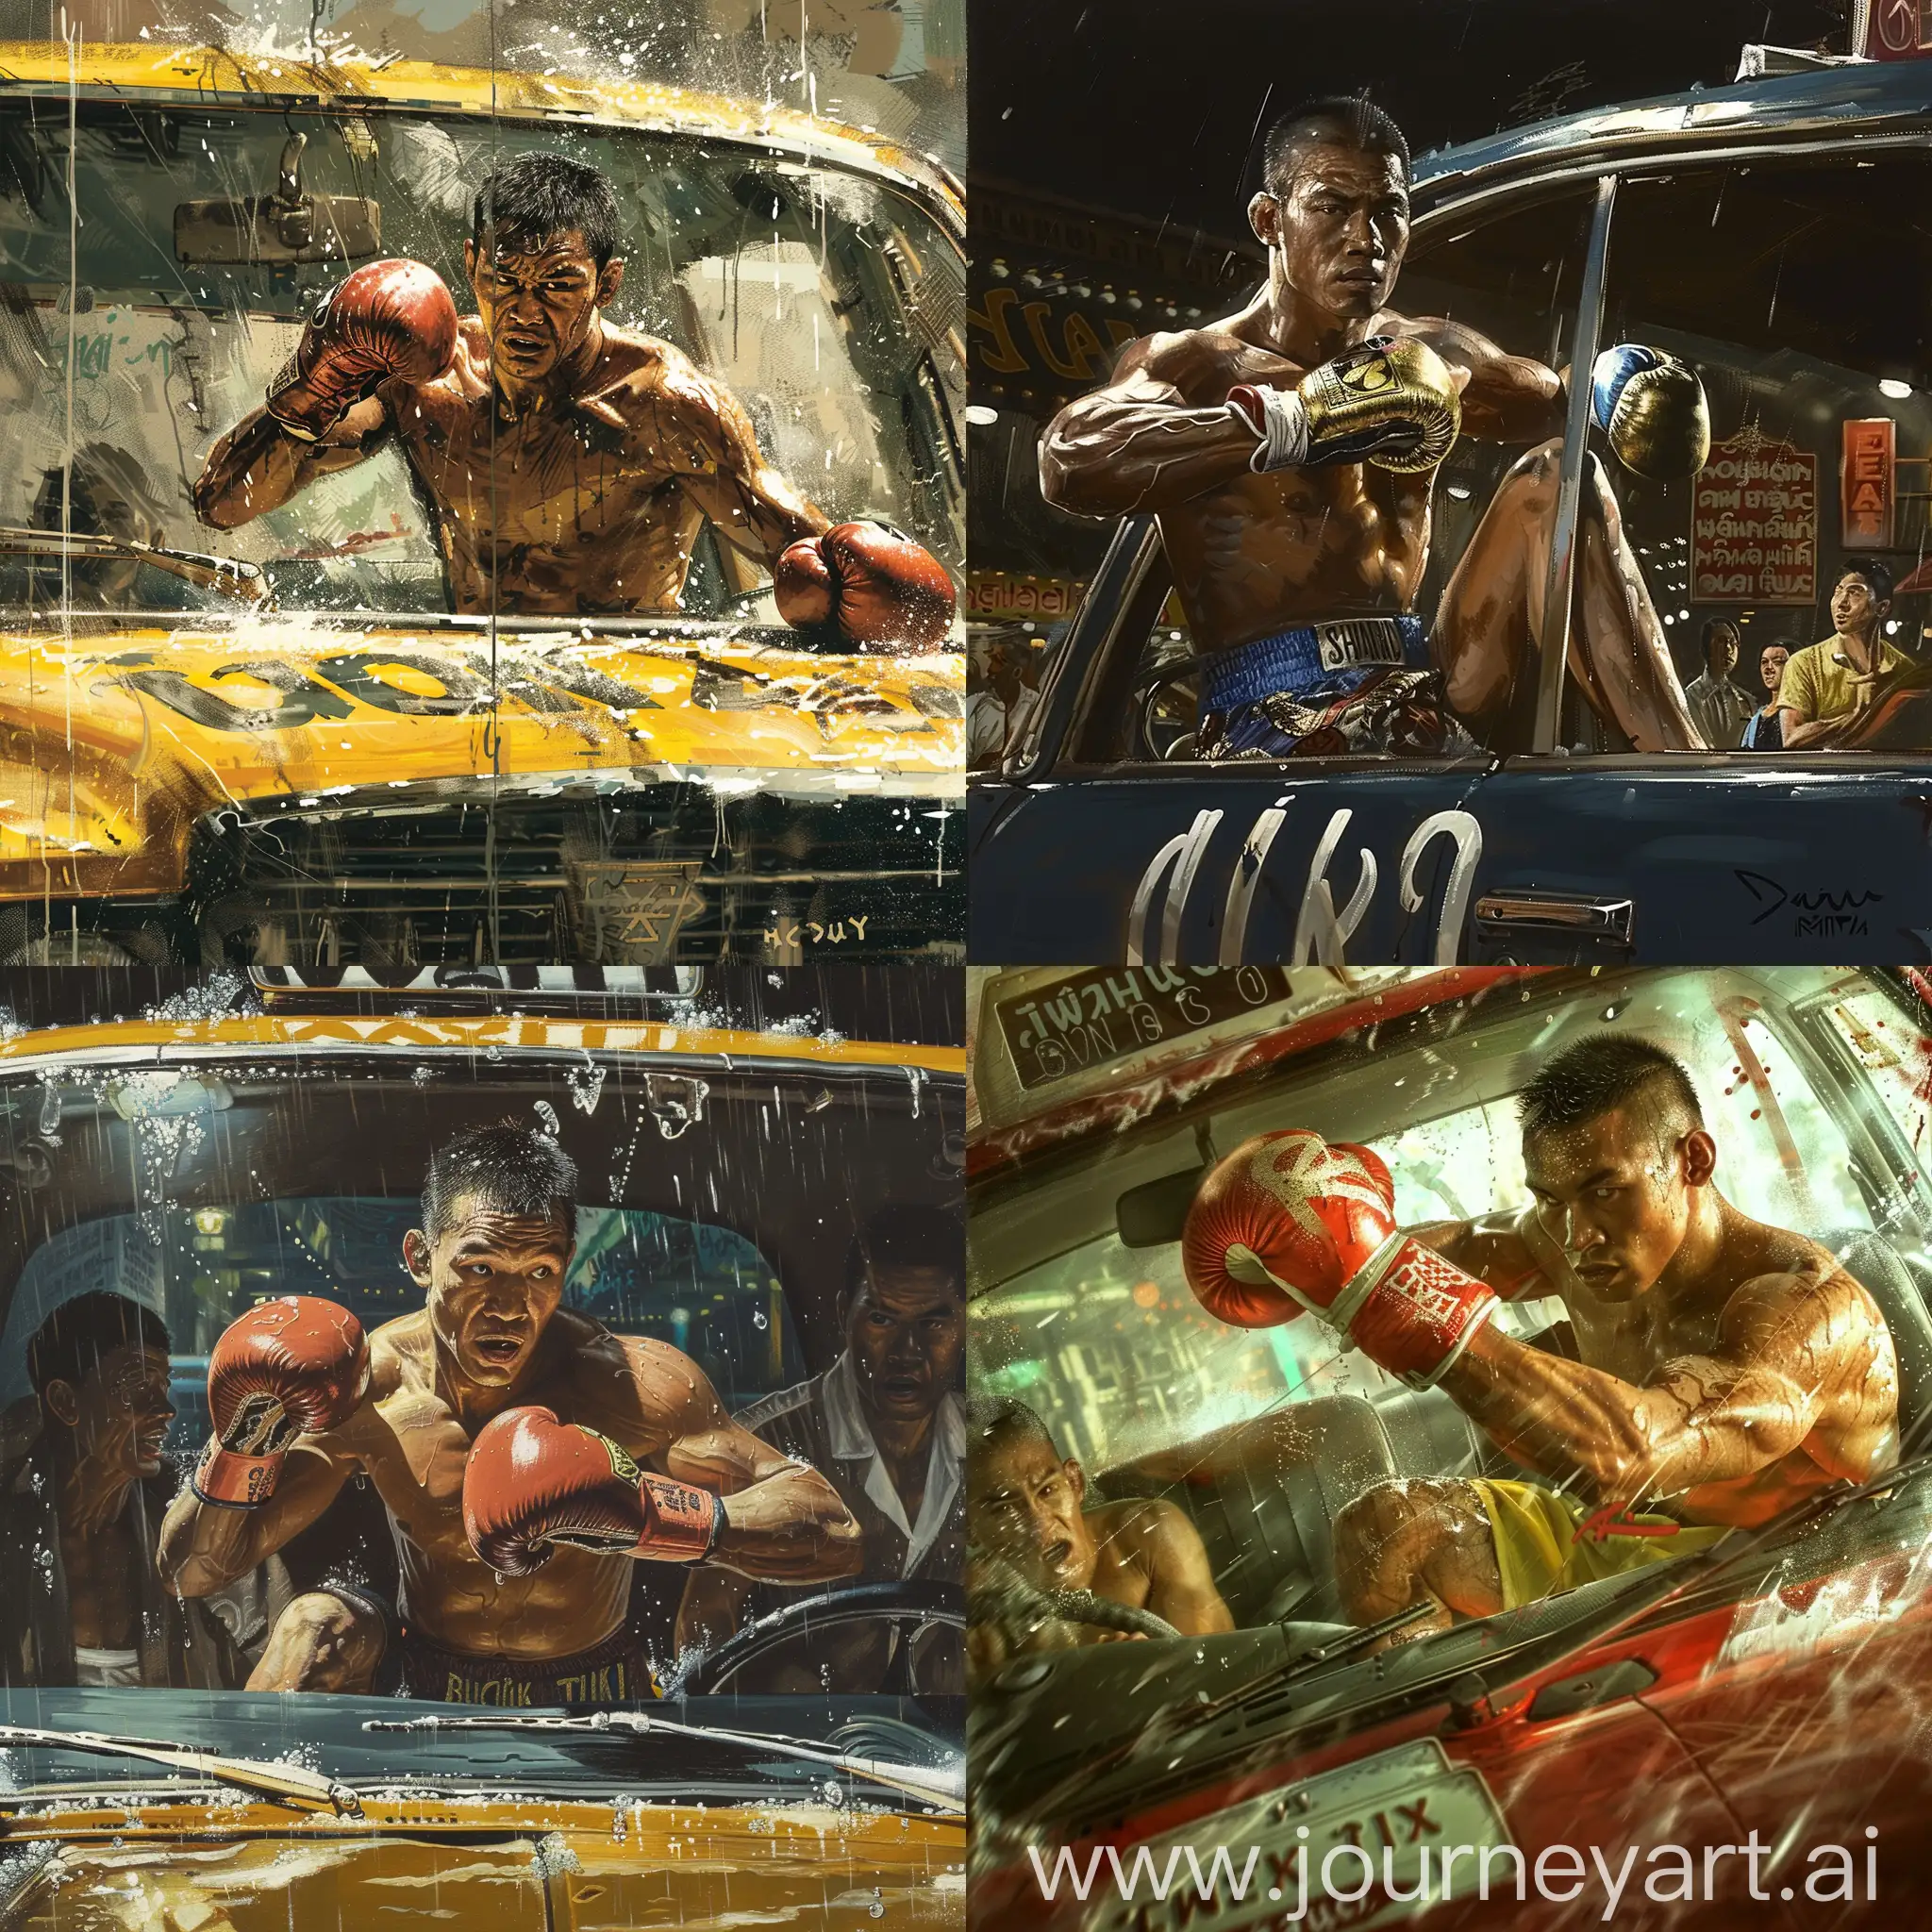 Thai-Boxer-Commuting-in-Taxi-Urban-Mobility-and-Martial-Arts-Fusion